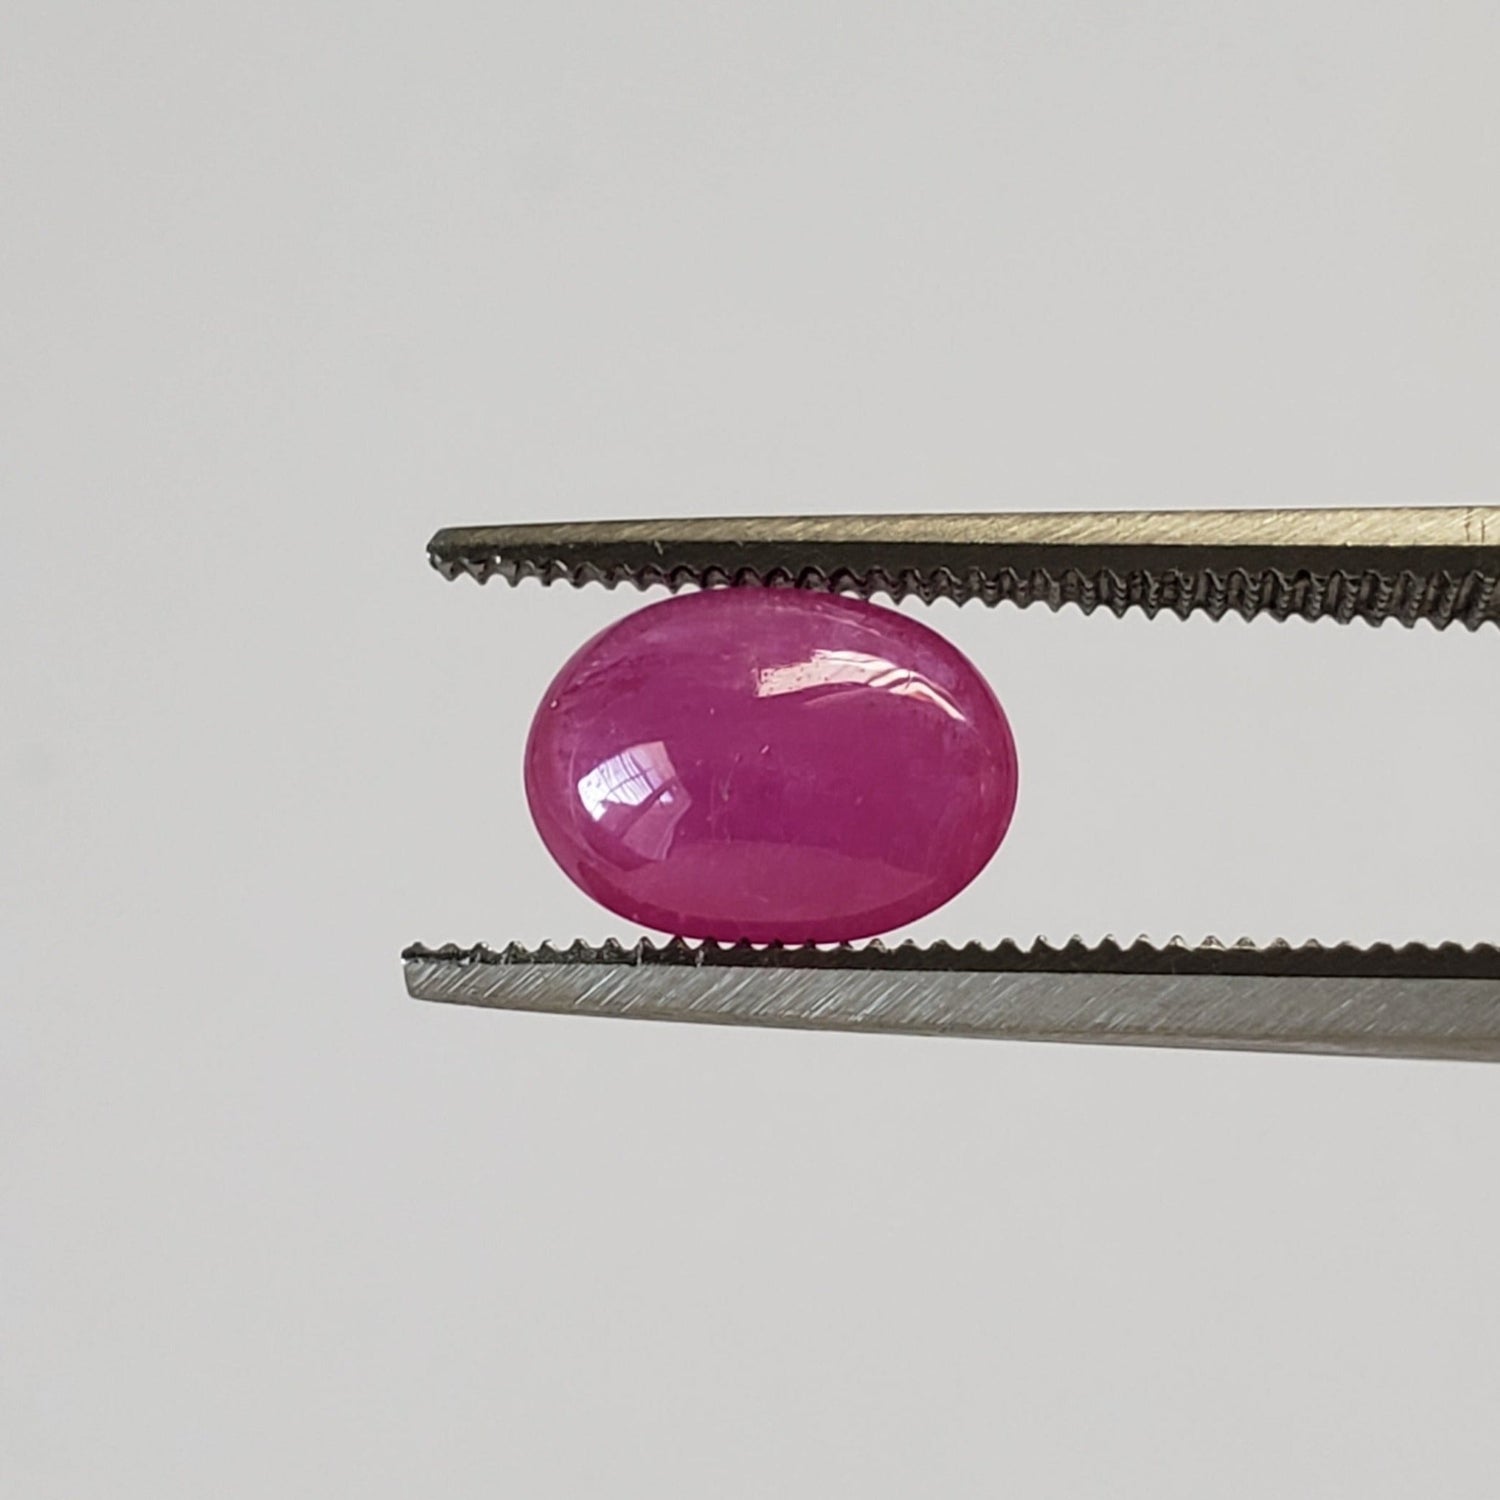 Ruby | Oval Cabochon | Pigeon Blood | 8x6mm